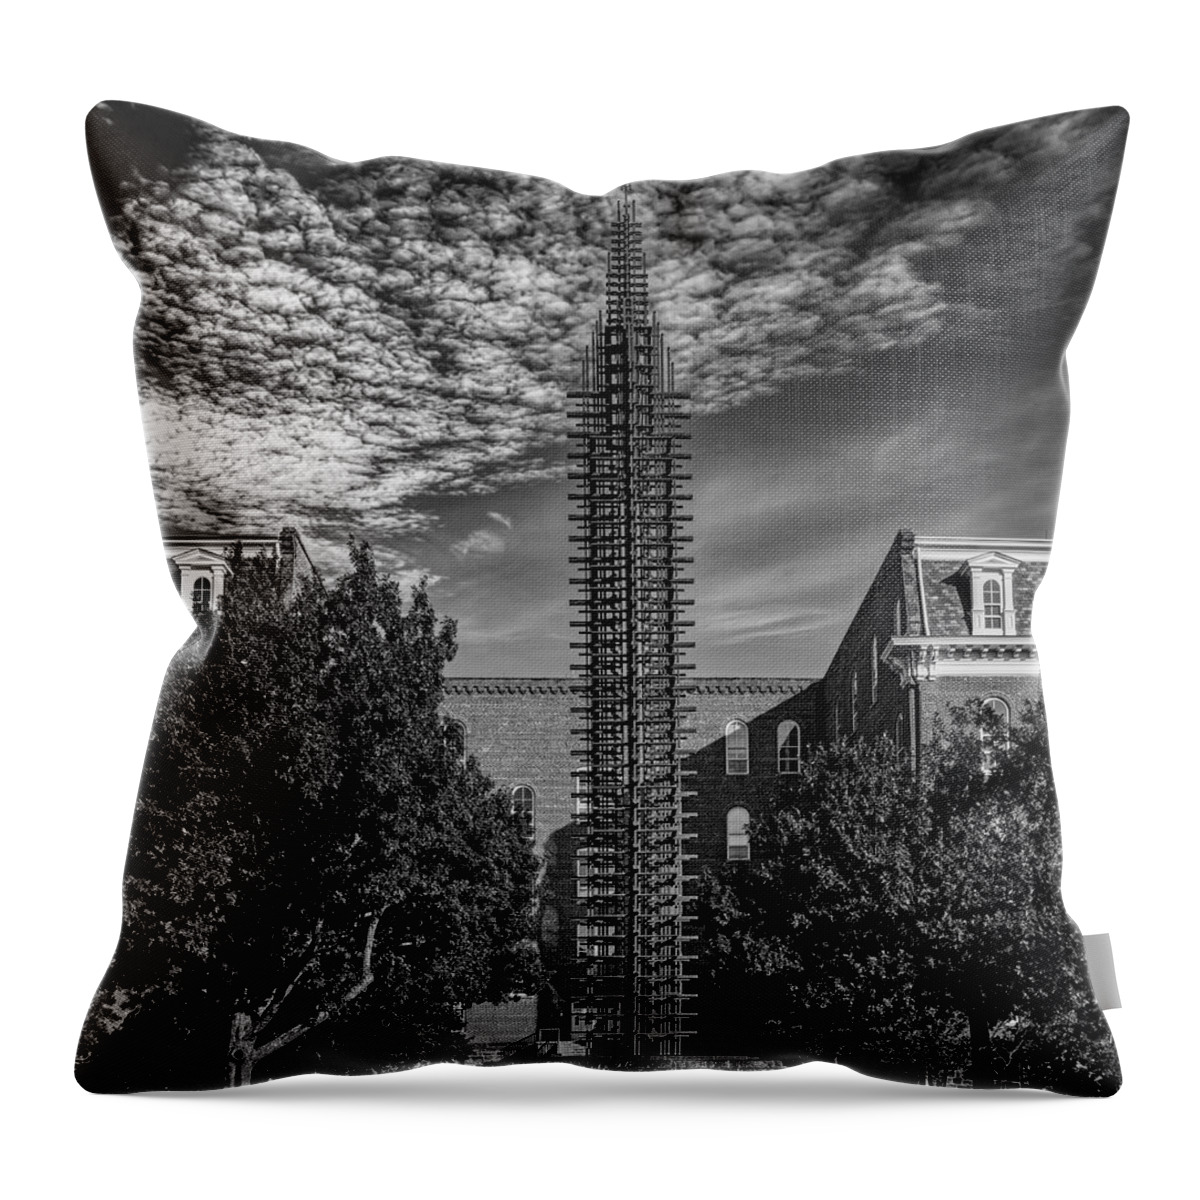 University Of Arkansas Throw Pillow featuring the photograph The Fulbright Peace Fountain #1 by Mountain Dreams